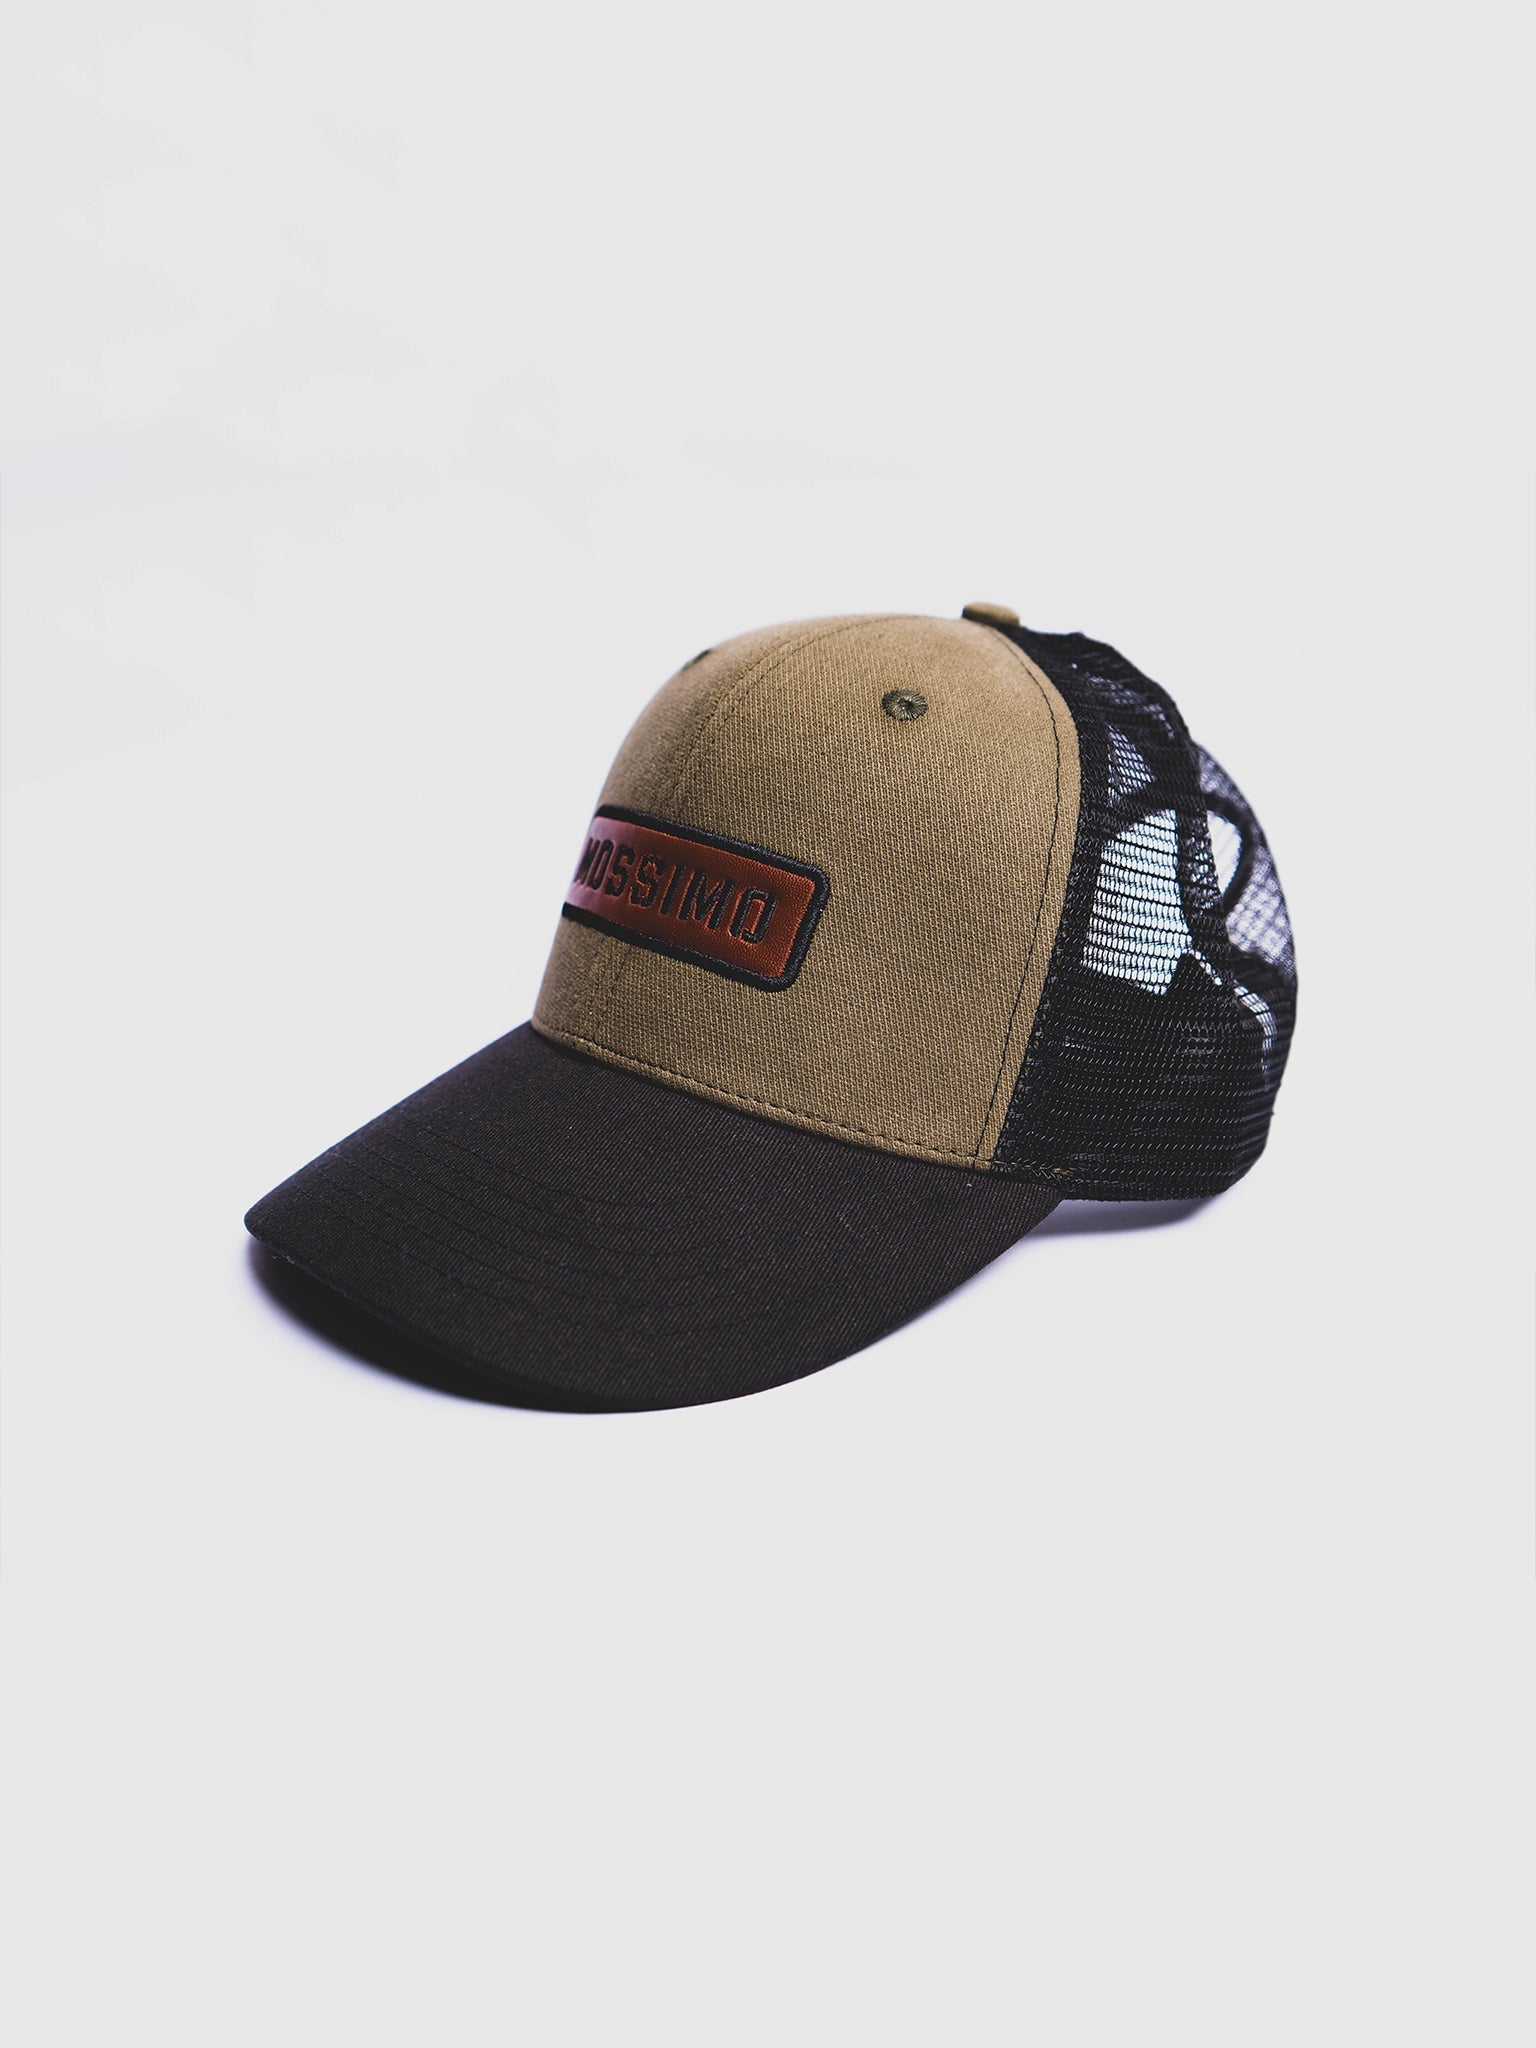 Fatigue Trucker Net Cap with Debossed Leather Patch - Mossimo PH